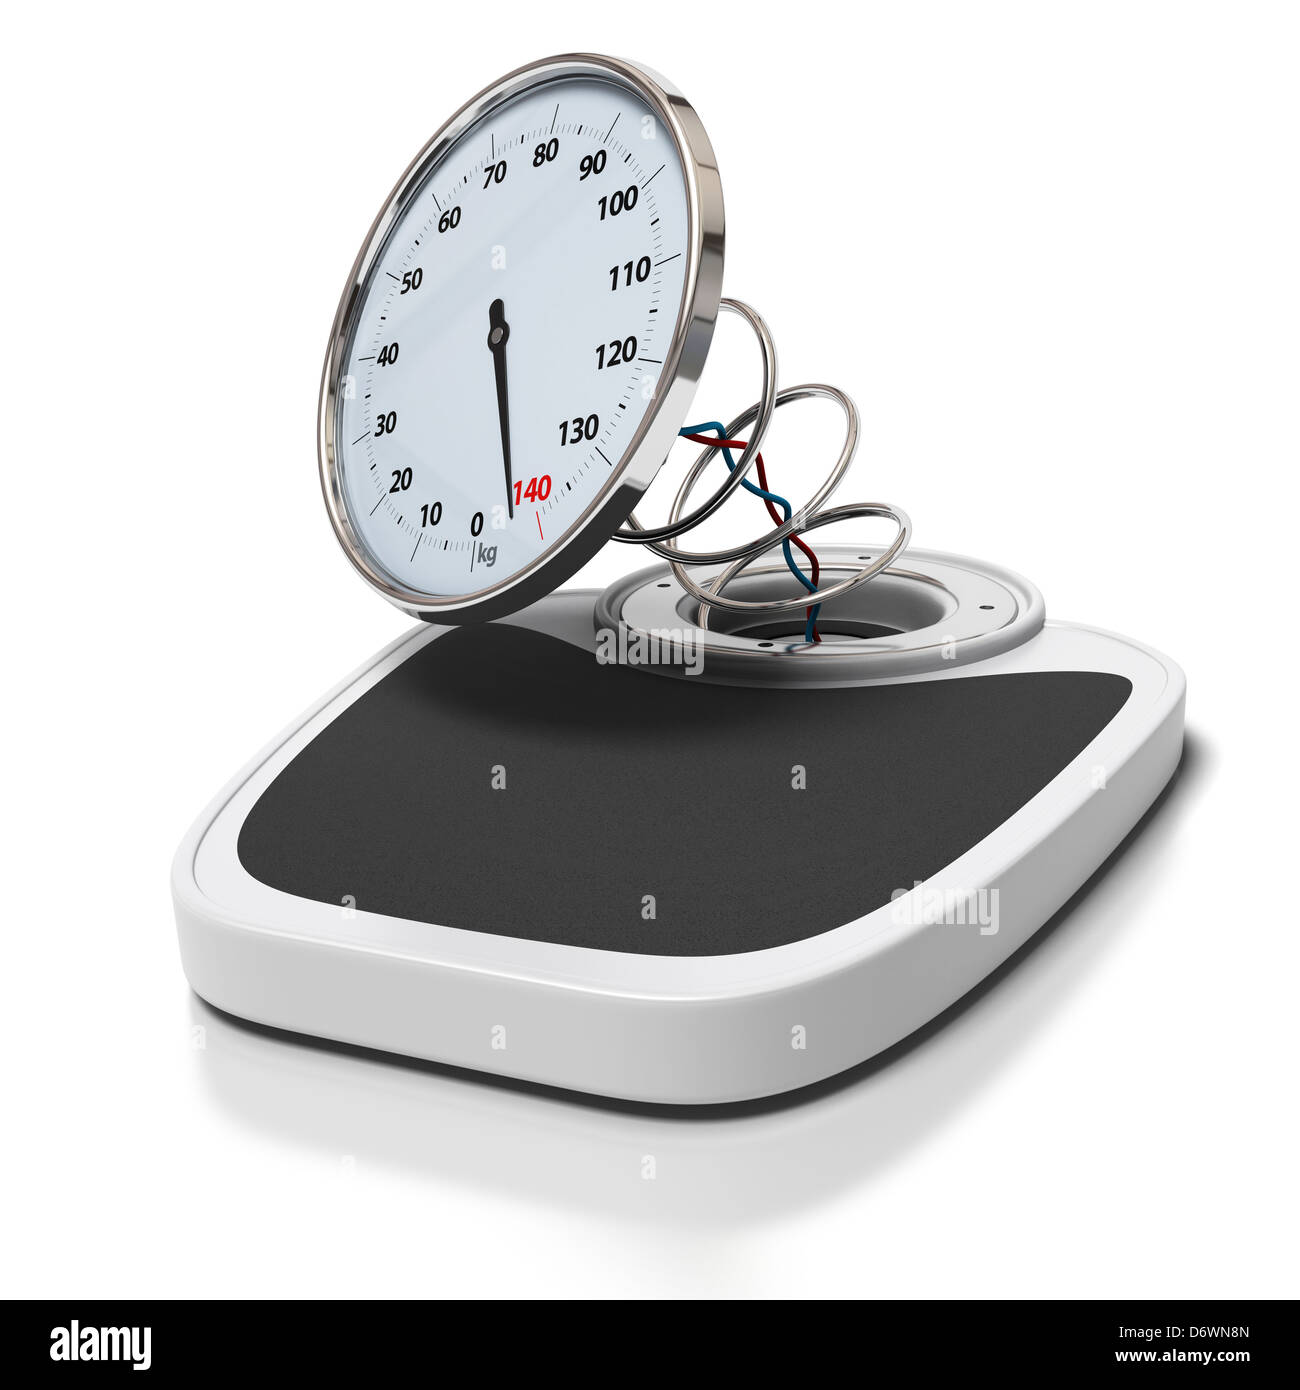 broken bathroom scales over a white background - overweight concept - square images Stock Photo